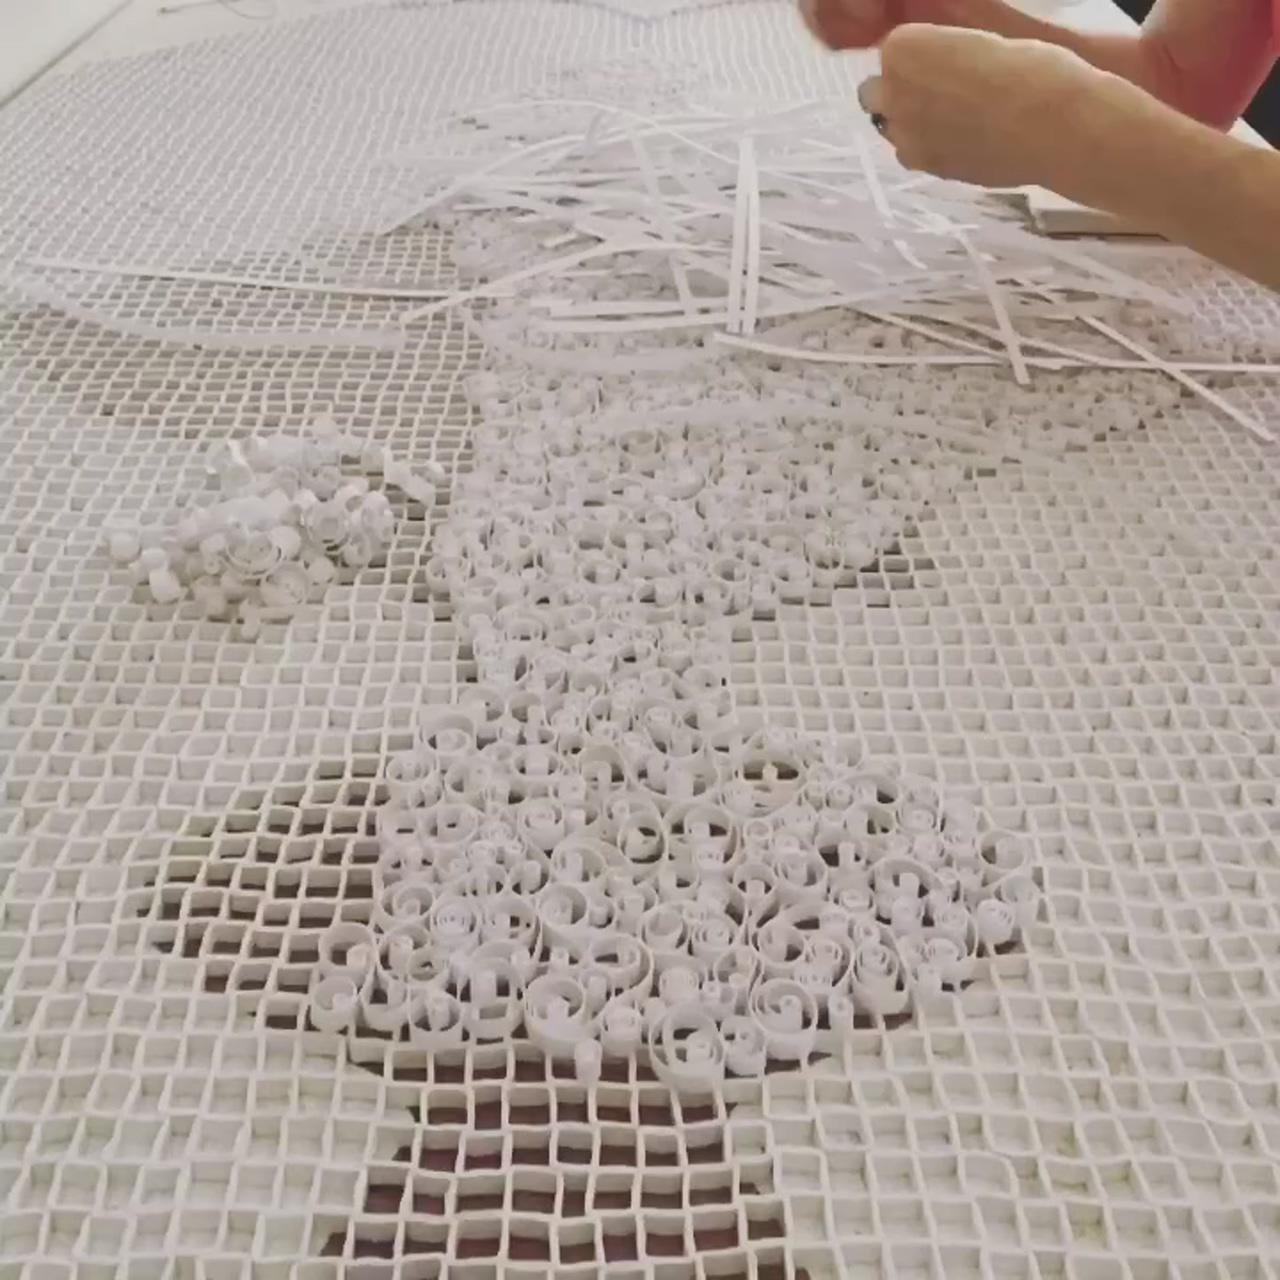 Griffin carrick design: quilled paper lace doily in progress | paper craft videos